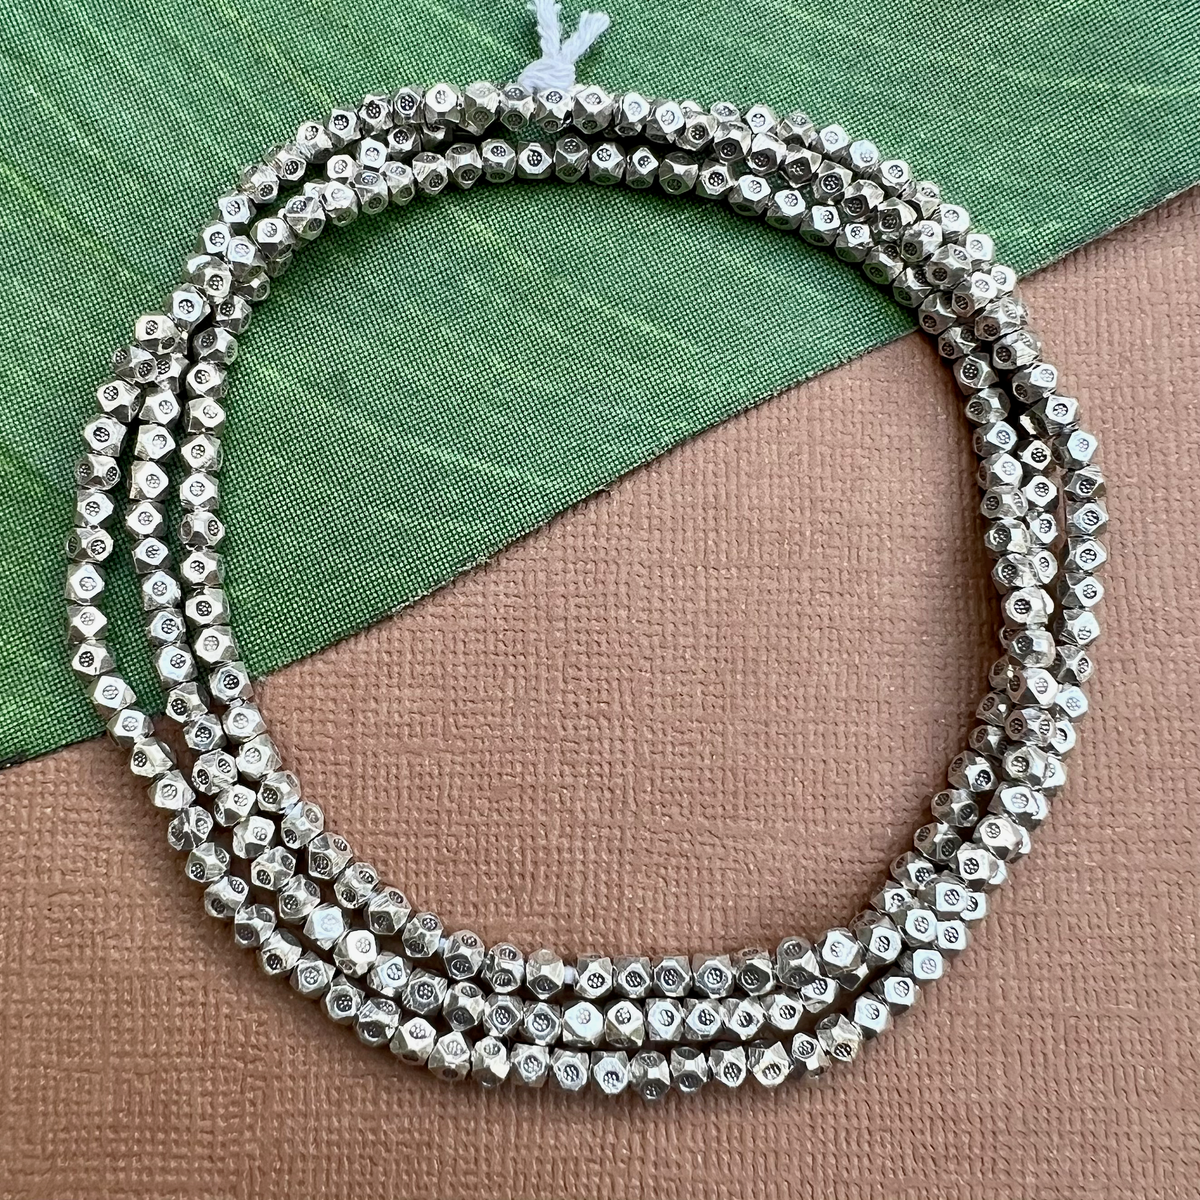 Hill Tribe Silver Stamped Discs Beads – Bead Goes On